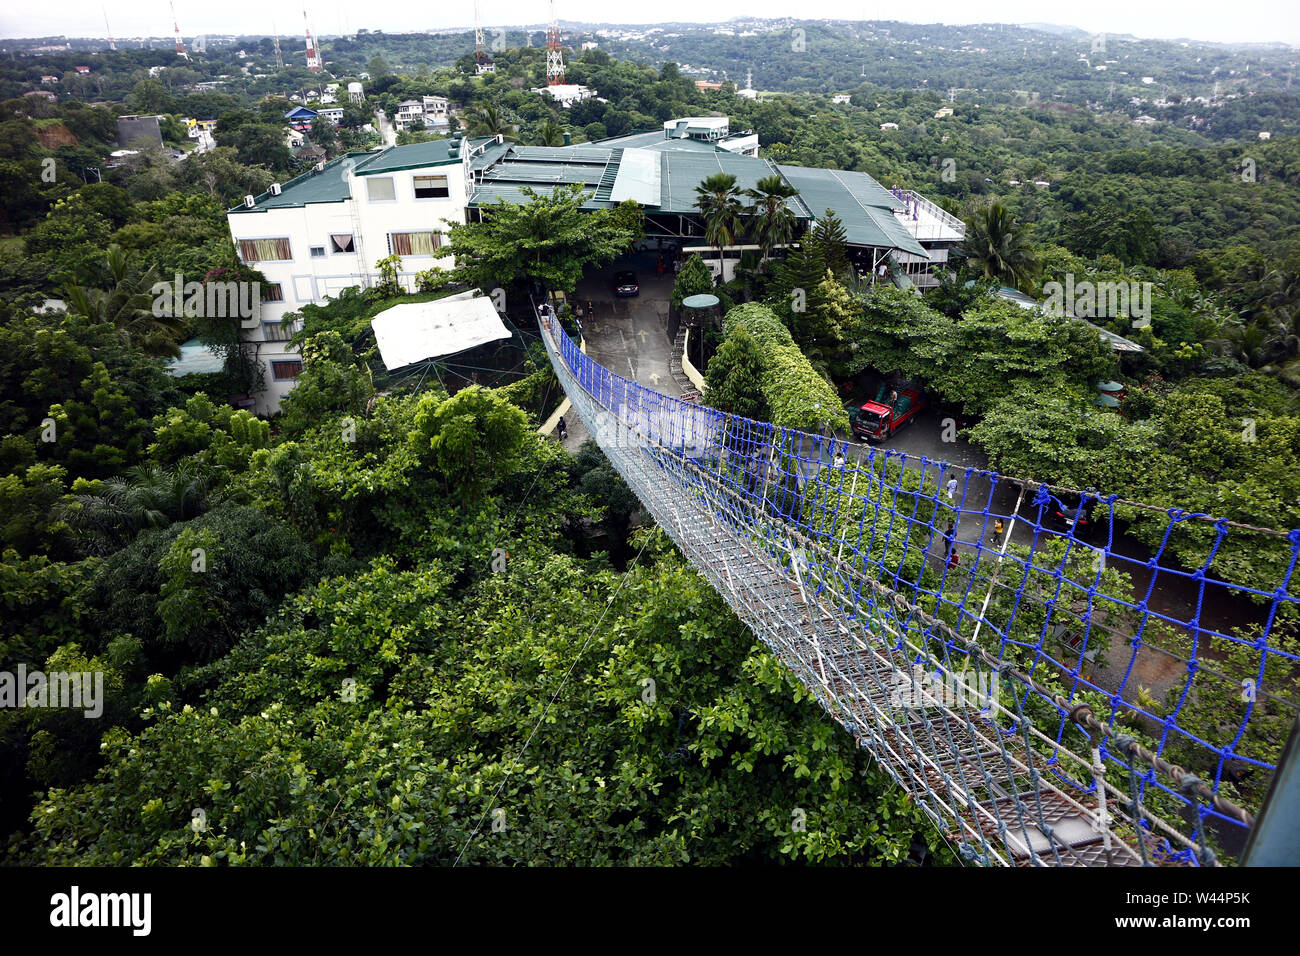 ANTIPOLO CITY, PHILIPPINES – JULY 17, 2019: Hanging bridge which leads to a 360 degree viewing deck at a restaurant and tourist destination in Antipol Stock Photo